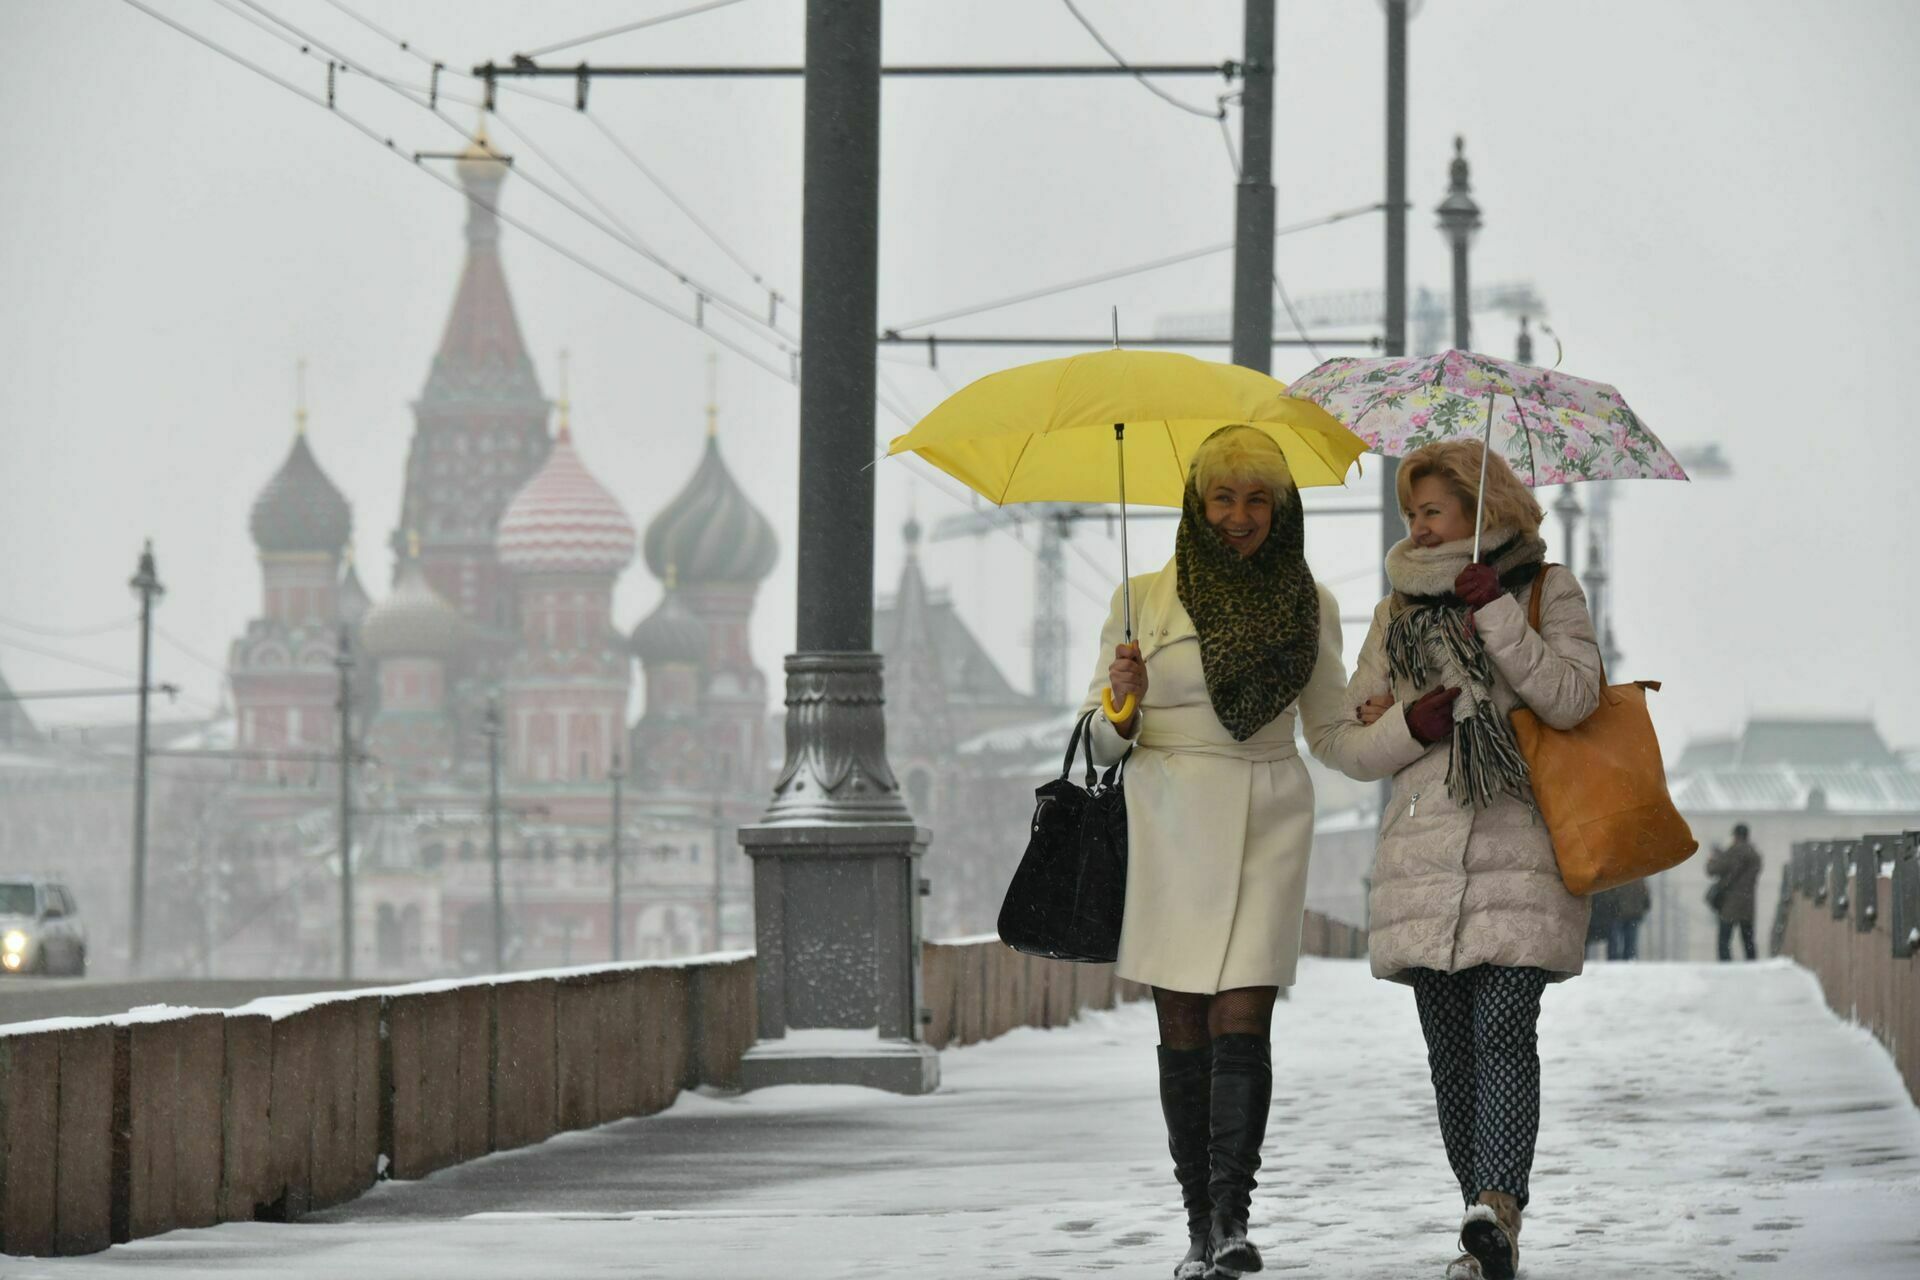 Forecasters warned of pressure drops in Moscow